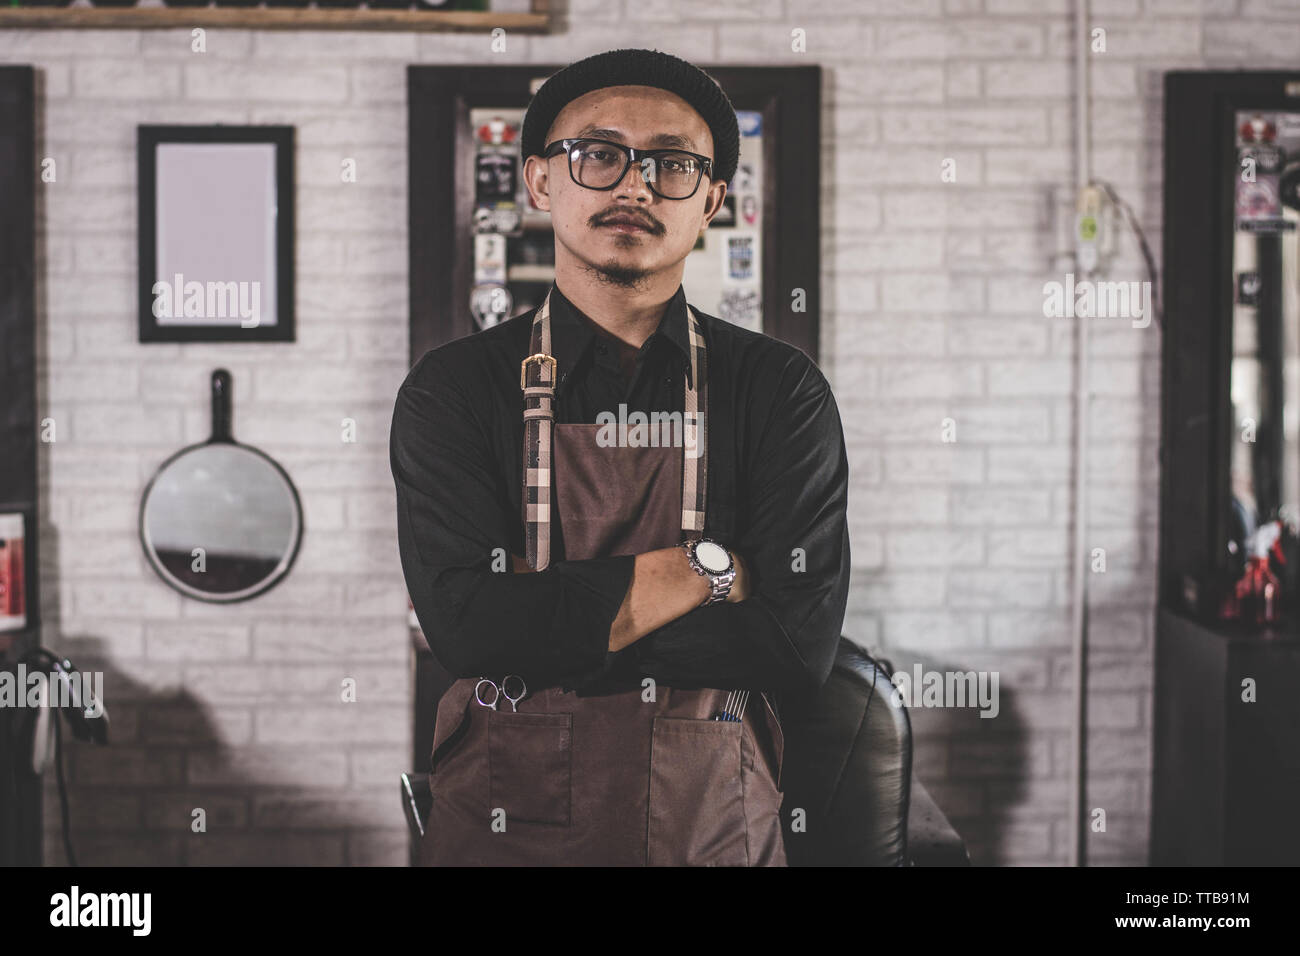 Barber man hairstylist  posing and standing with apron crossed his arm at barbershop salon Stock Photo